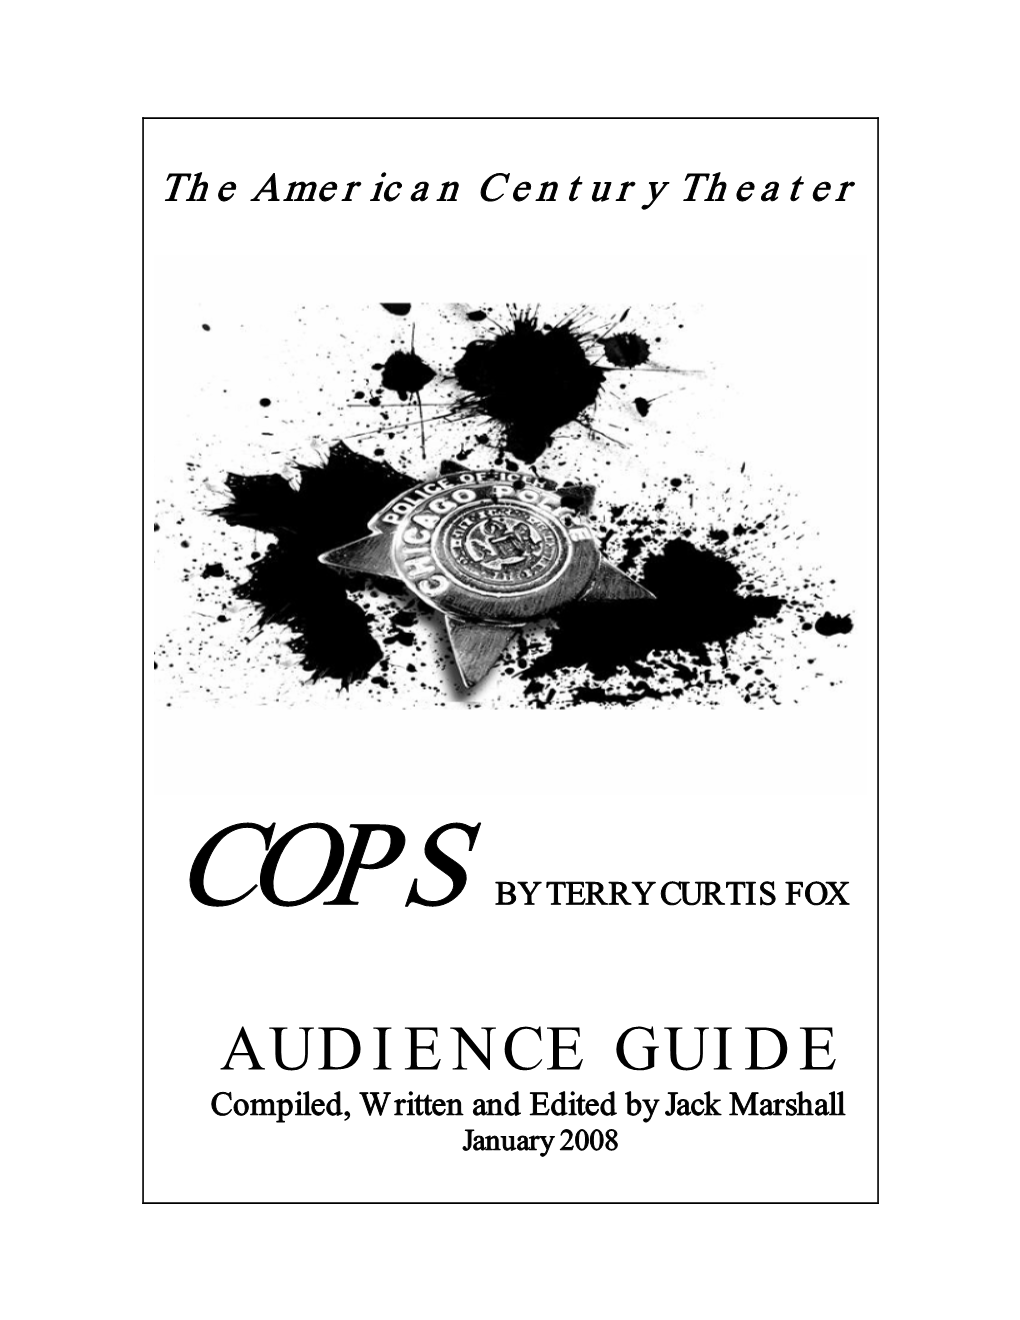 Cops by Terry Curtis Fox